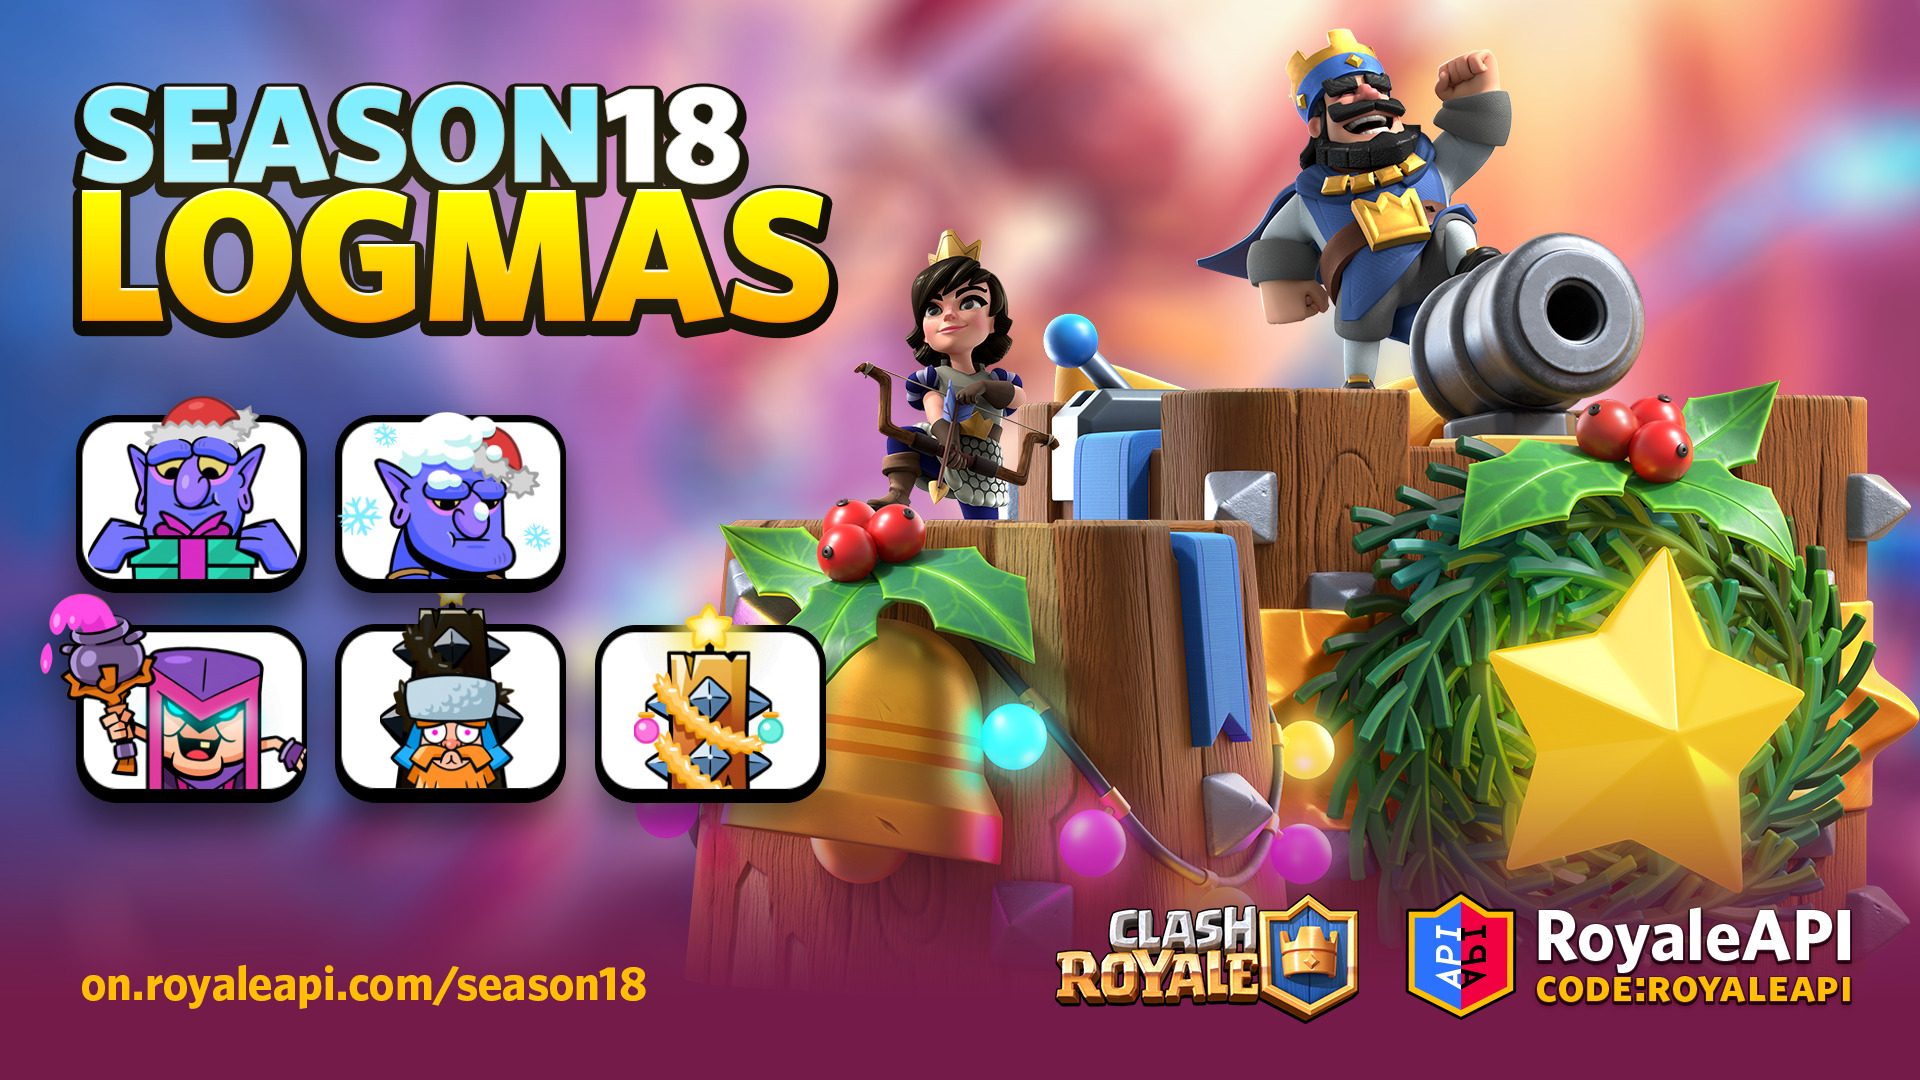 Clash Royale - Clash Royale added a new photo.